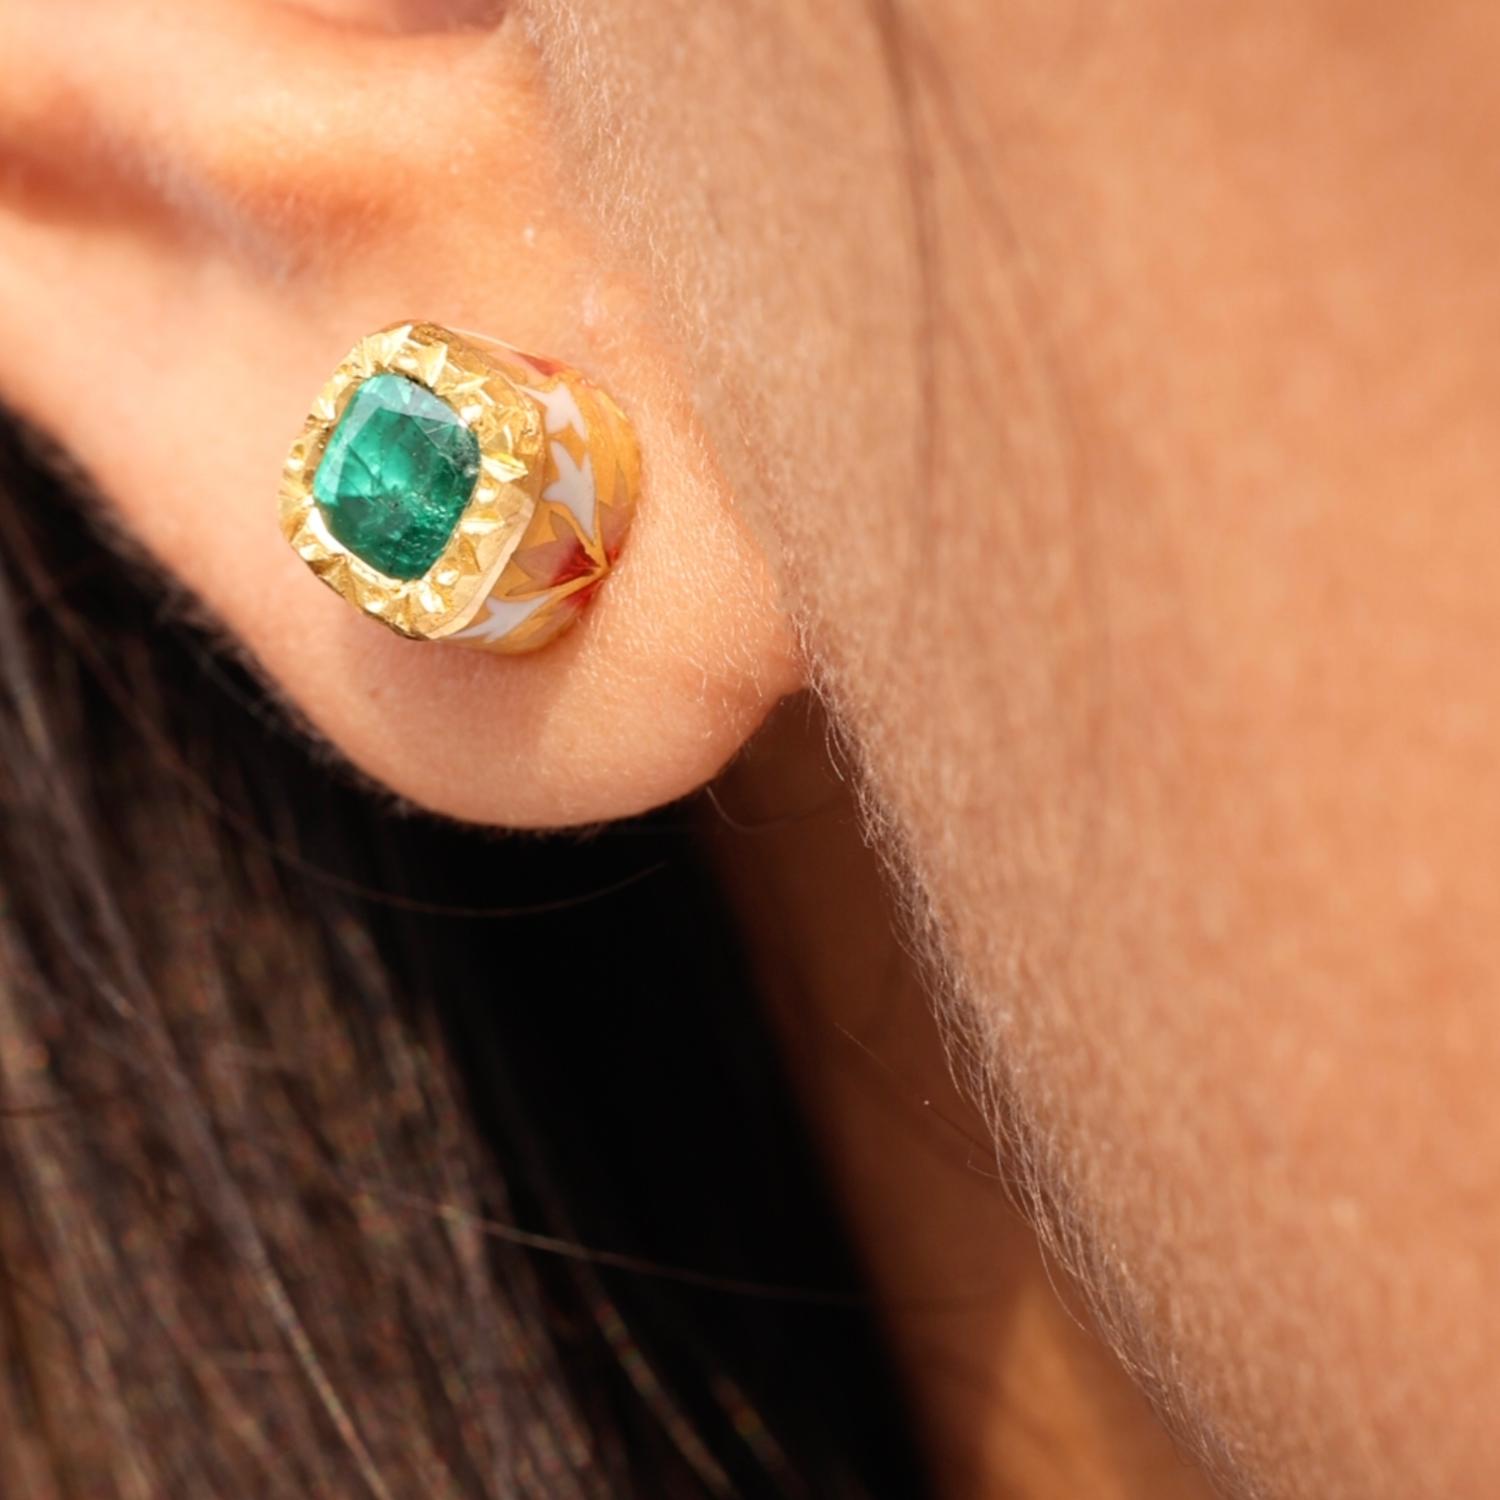 Contemporary 1.64 Carat Emerald and Enamel Stud Earrings in 22K Gold Handmade by Agaro Jewels